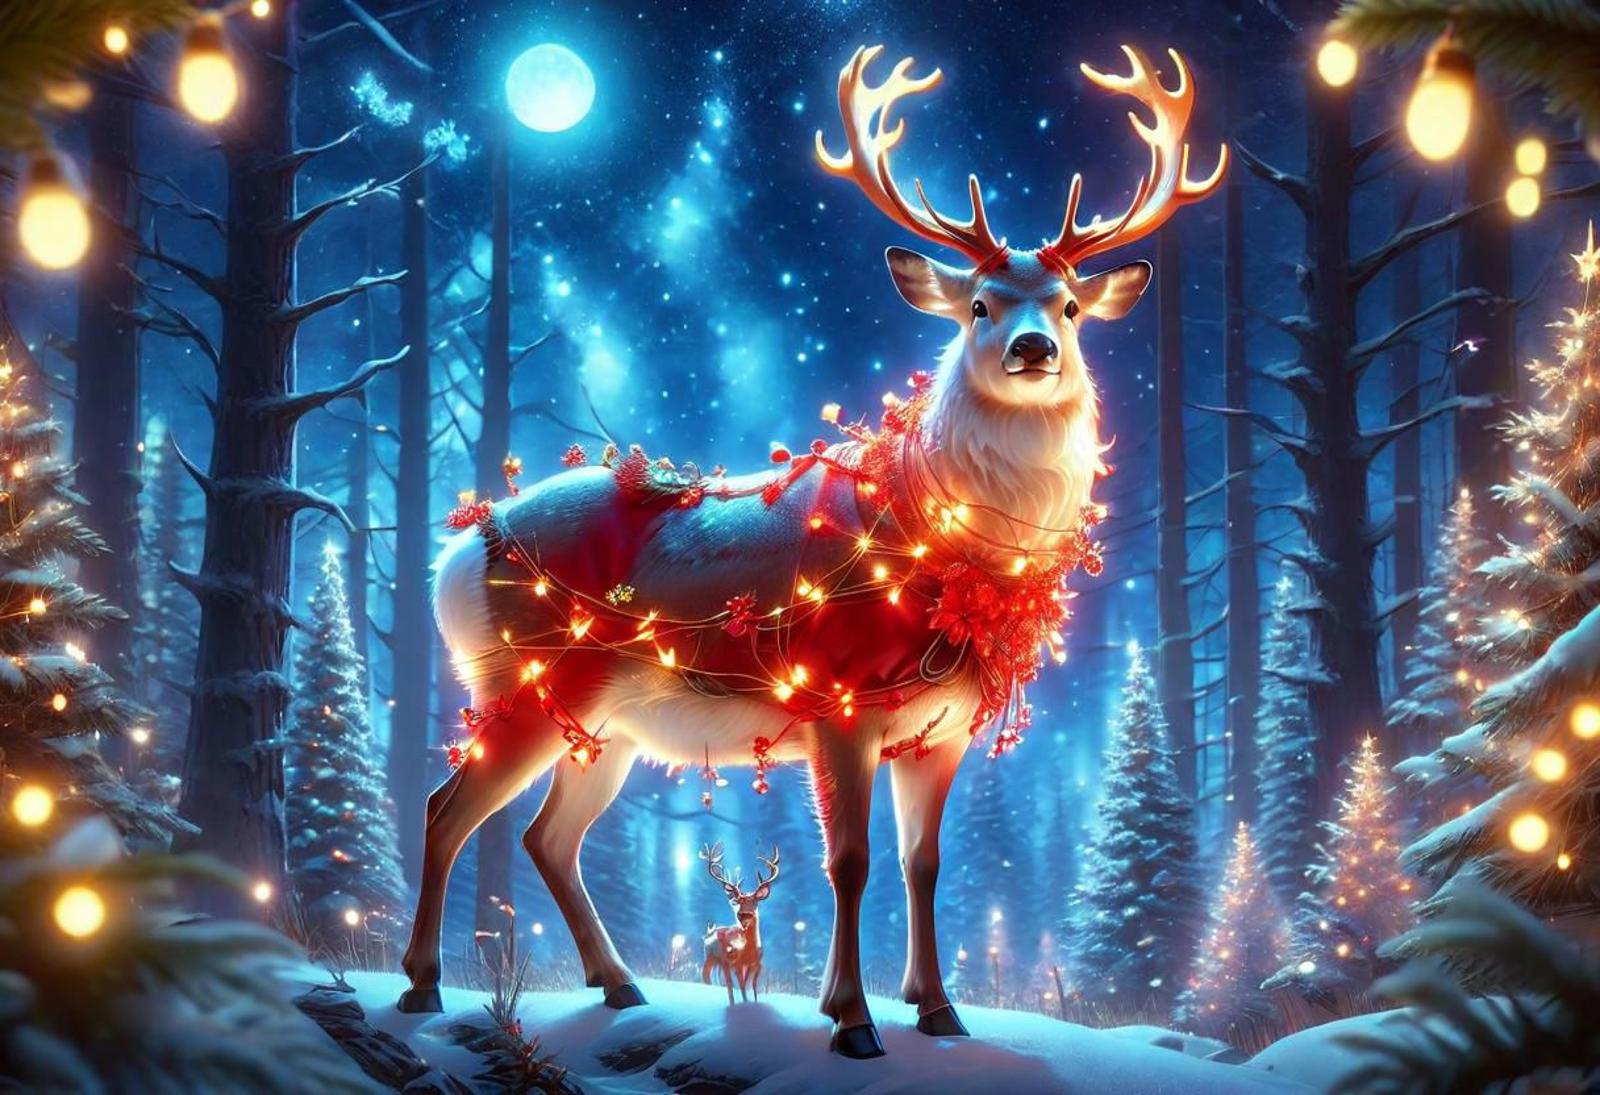 A Christmas-themed deer with antlers and lights on its neck standing in the snow.